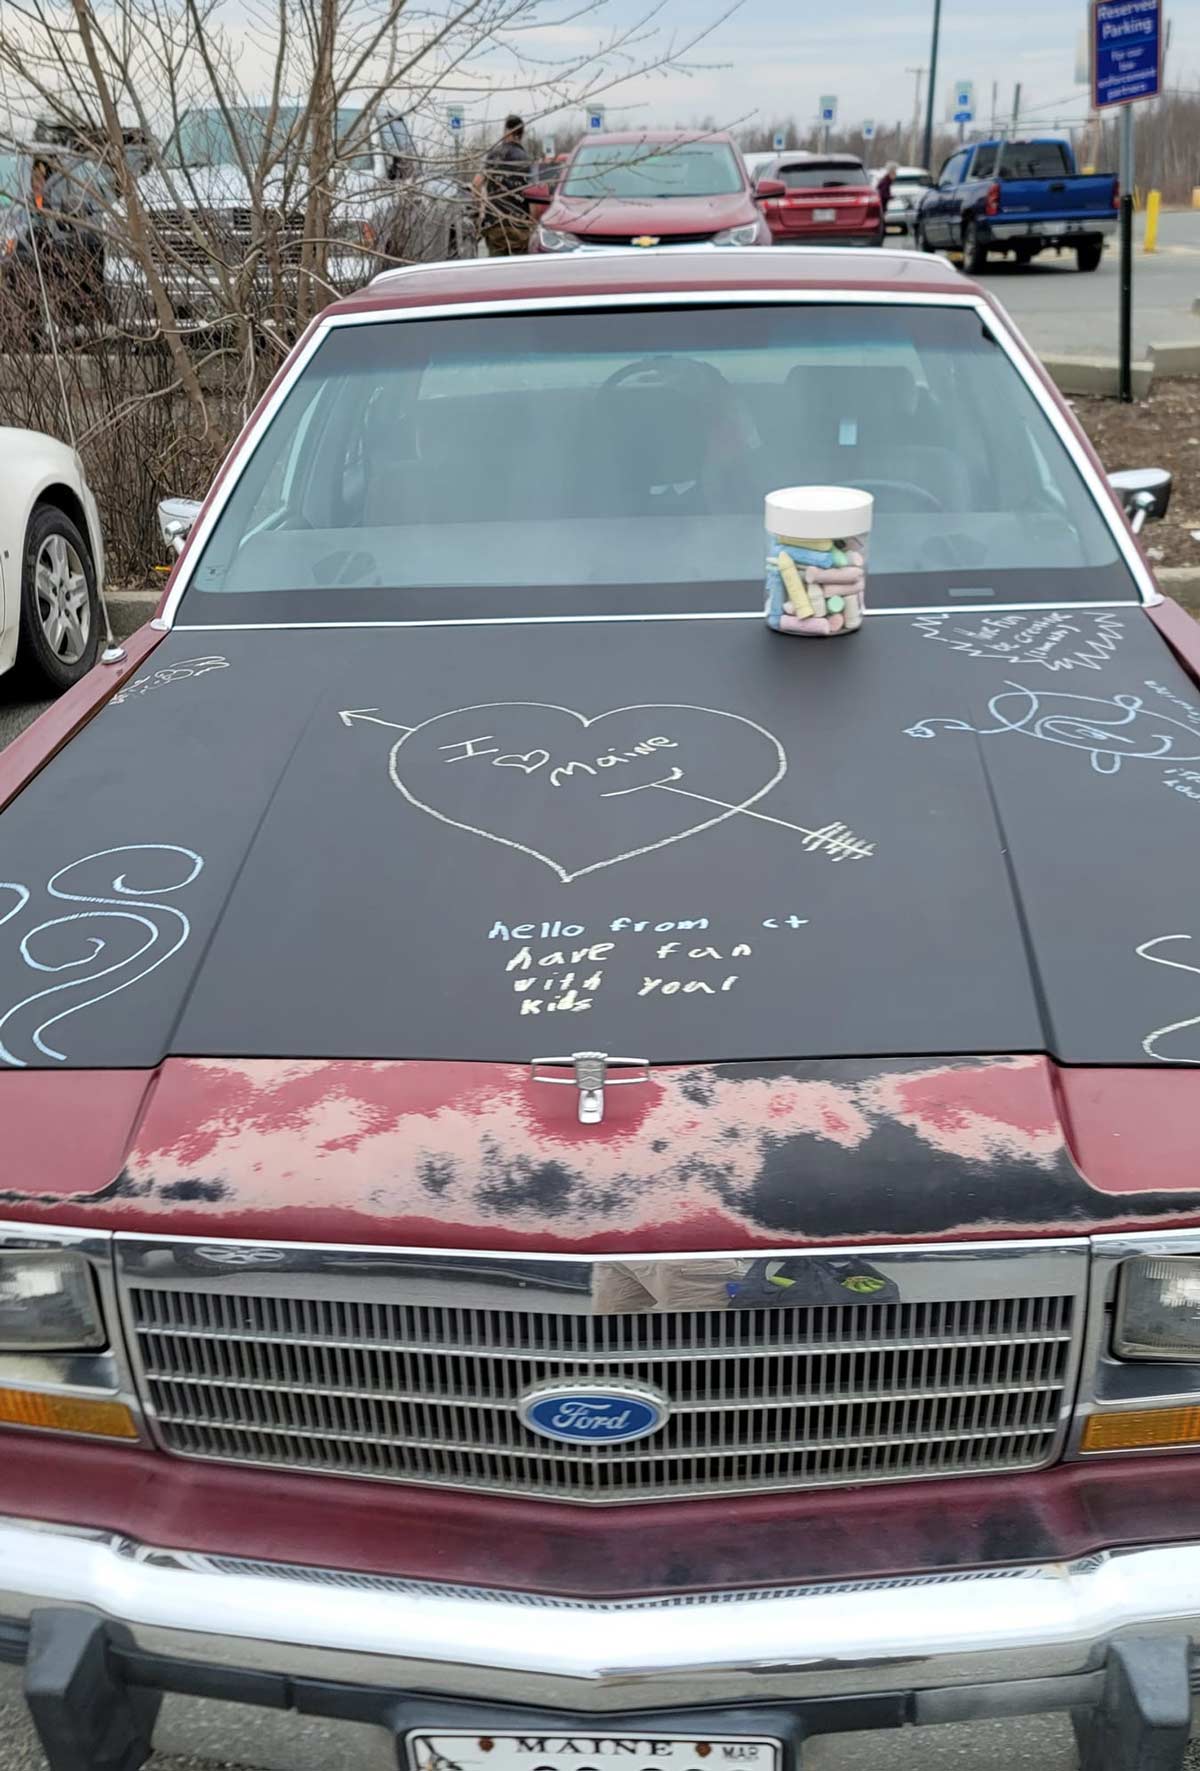 This car has a blackboard paint hood and bucket of chalk, allowing anyone to doodle on it as they pass by in the parking lot